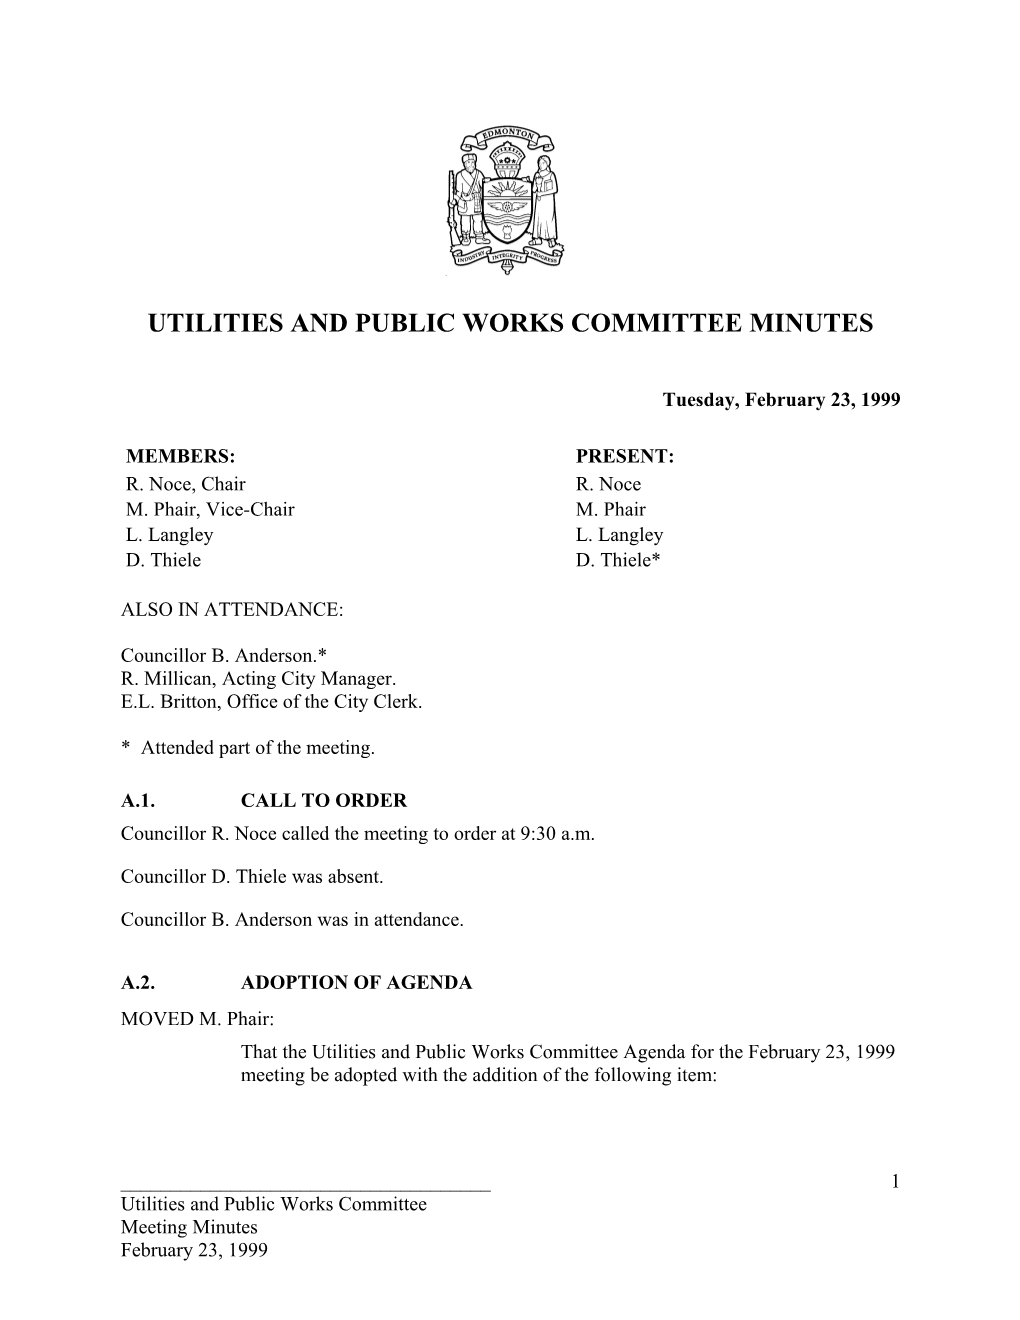 Minutes for Utilities and Public Works Committee February 23, 1999 Meeting